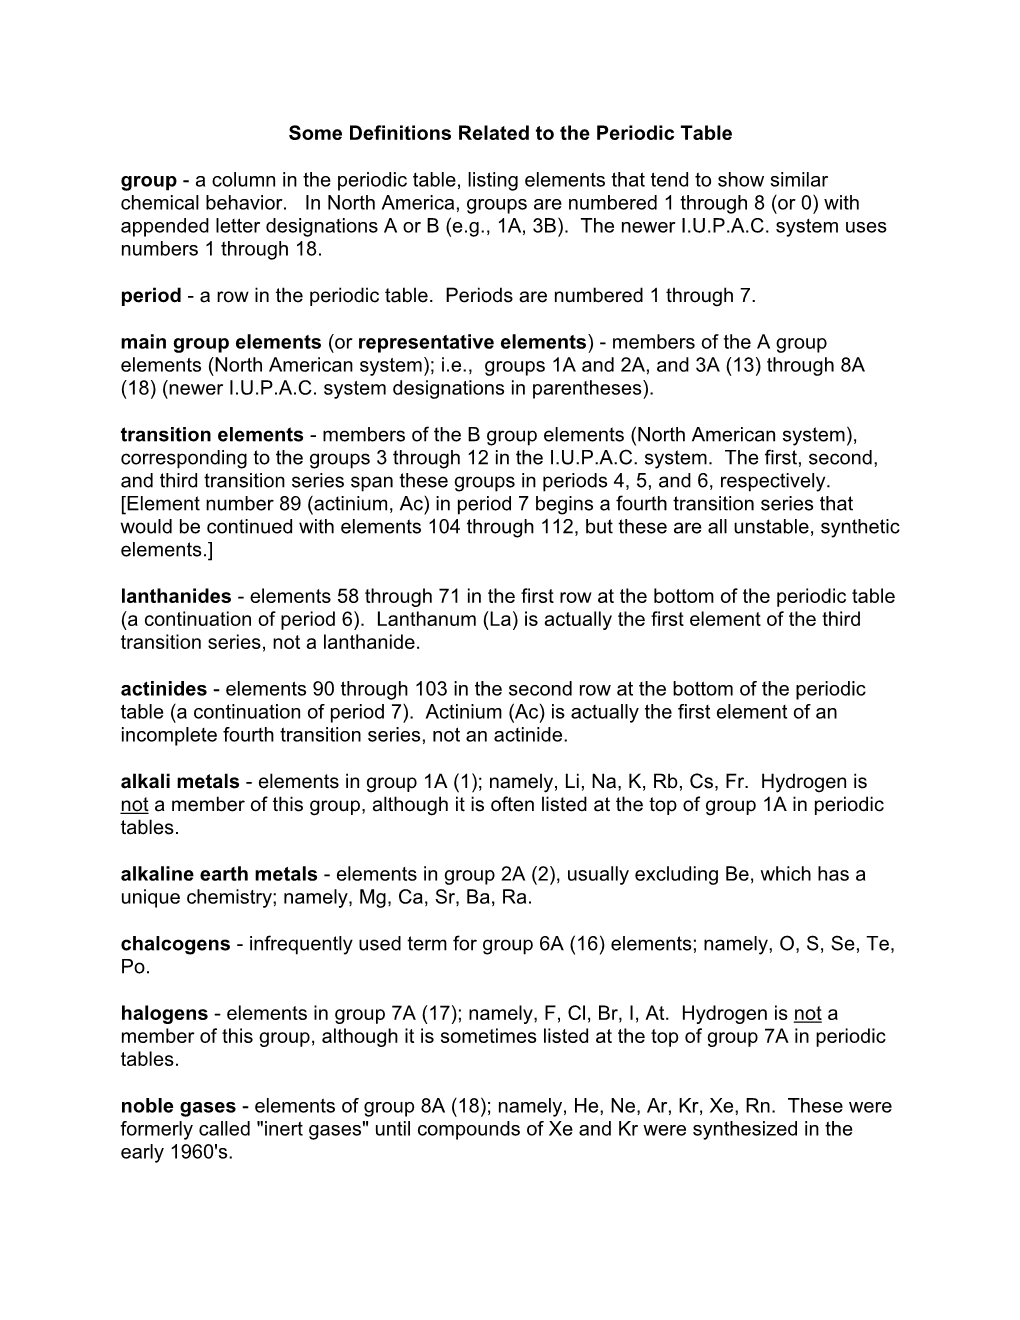 Some Definitions Related to the Periodic Table Group